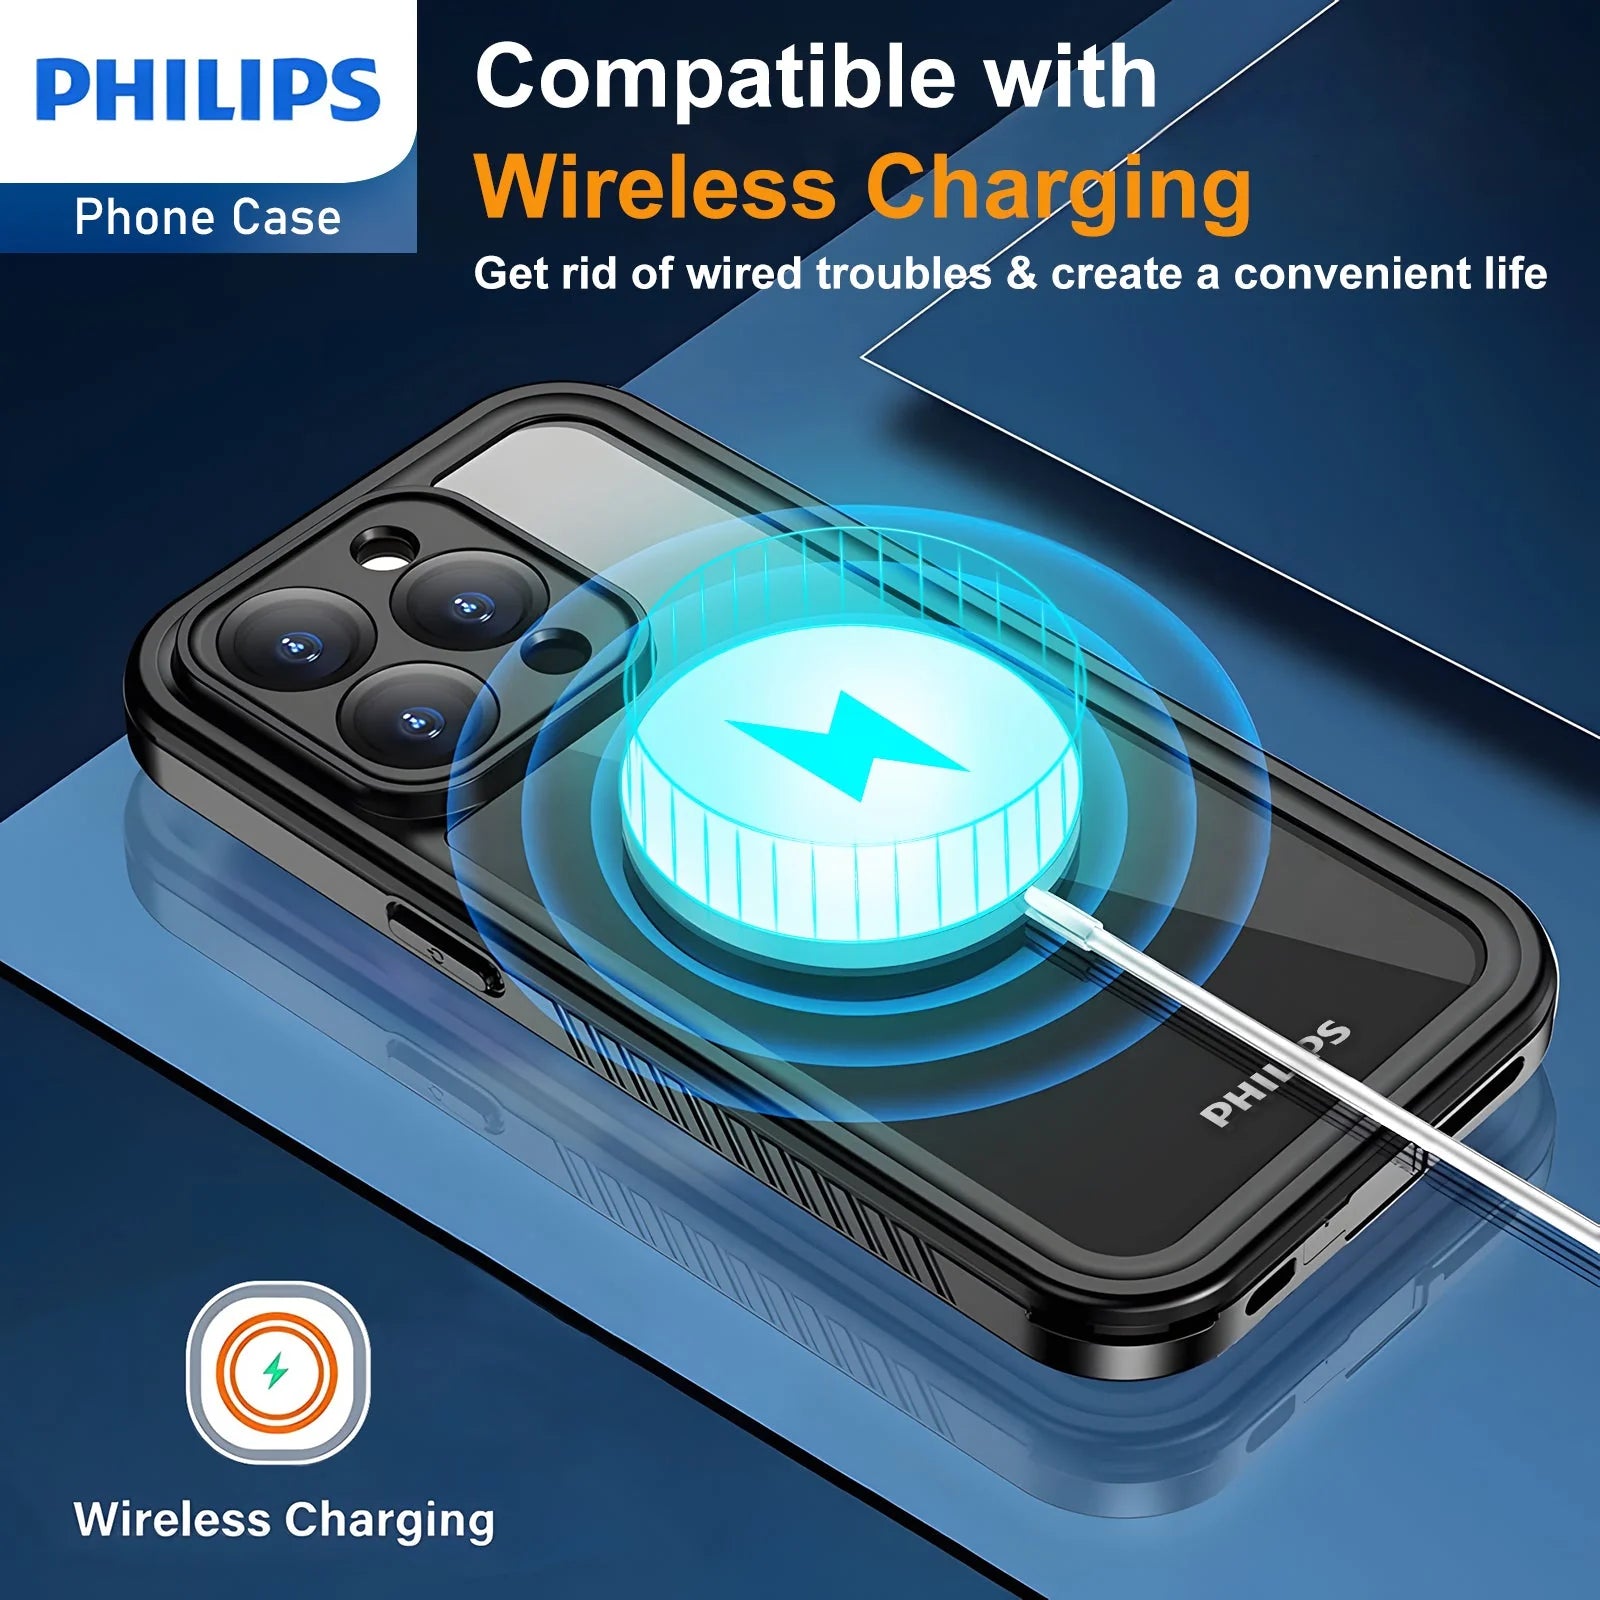 Philips IP68 iPhone Lifeproof Waterproof Dustproof Dropproof case with Magsafe